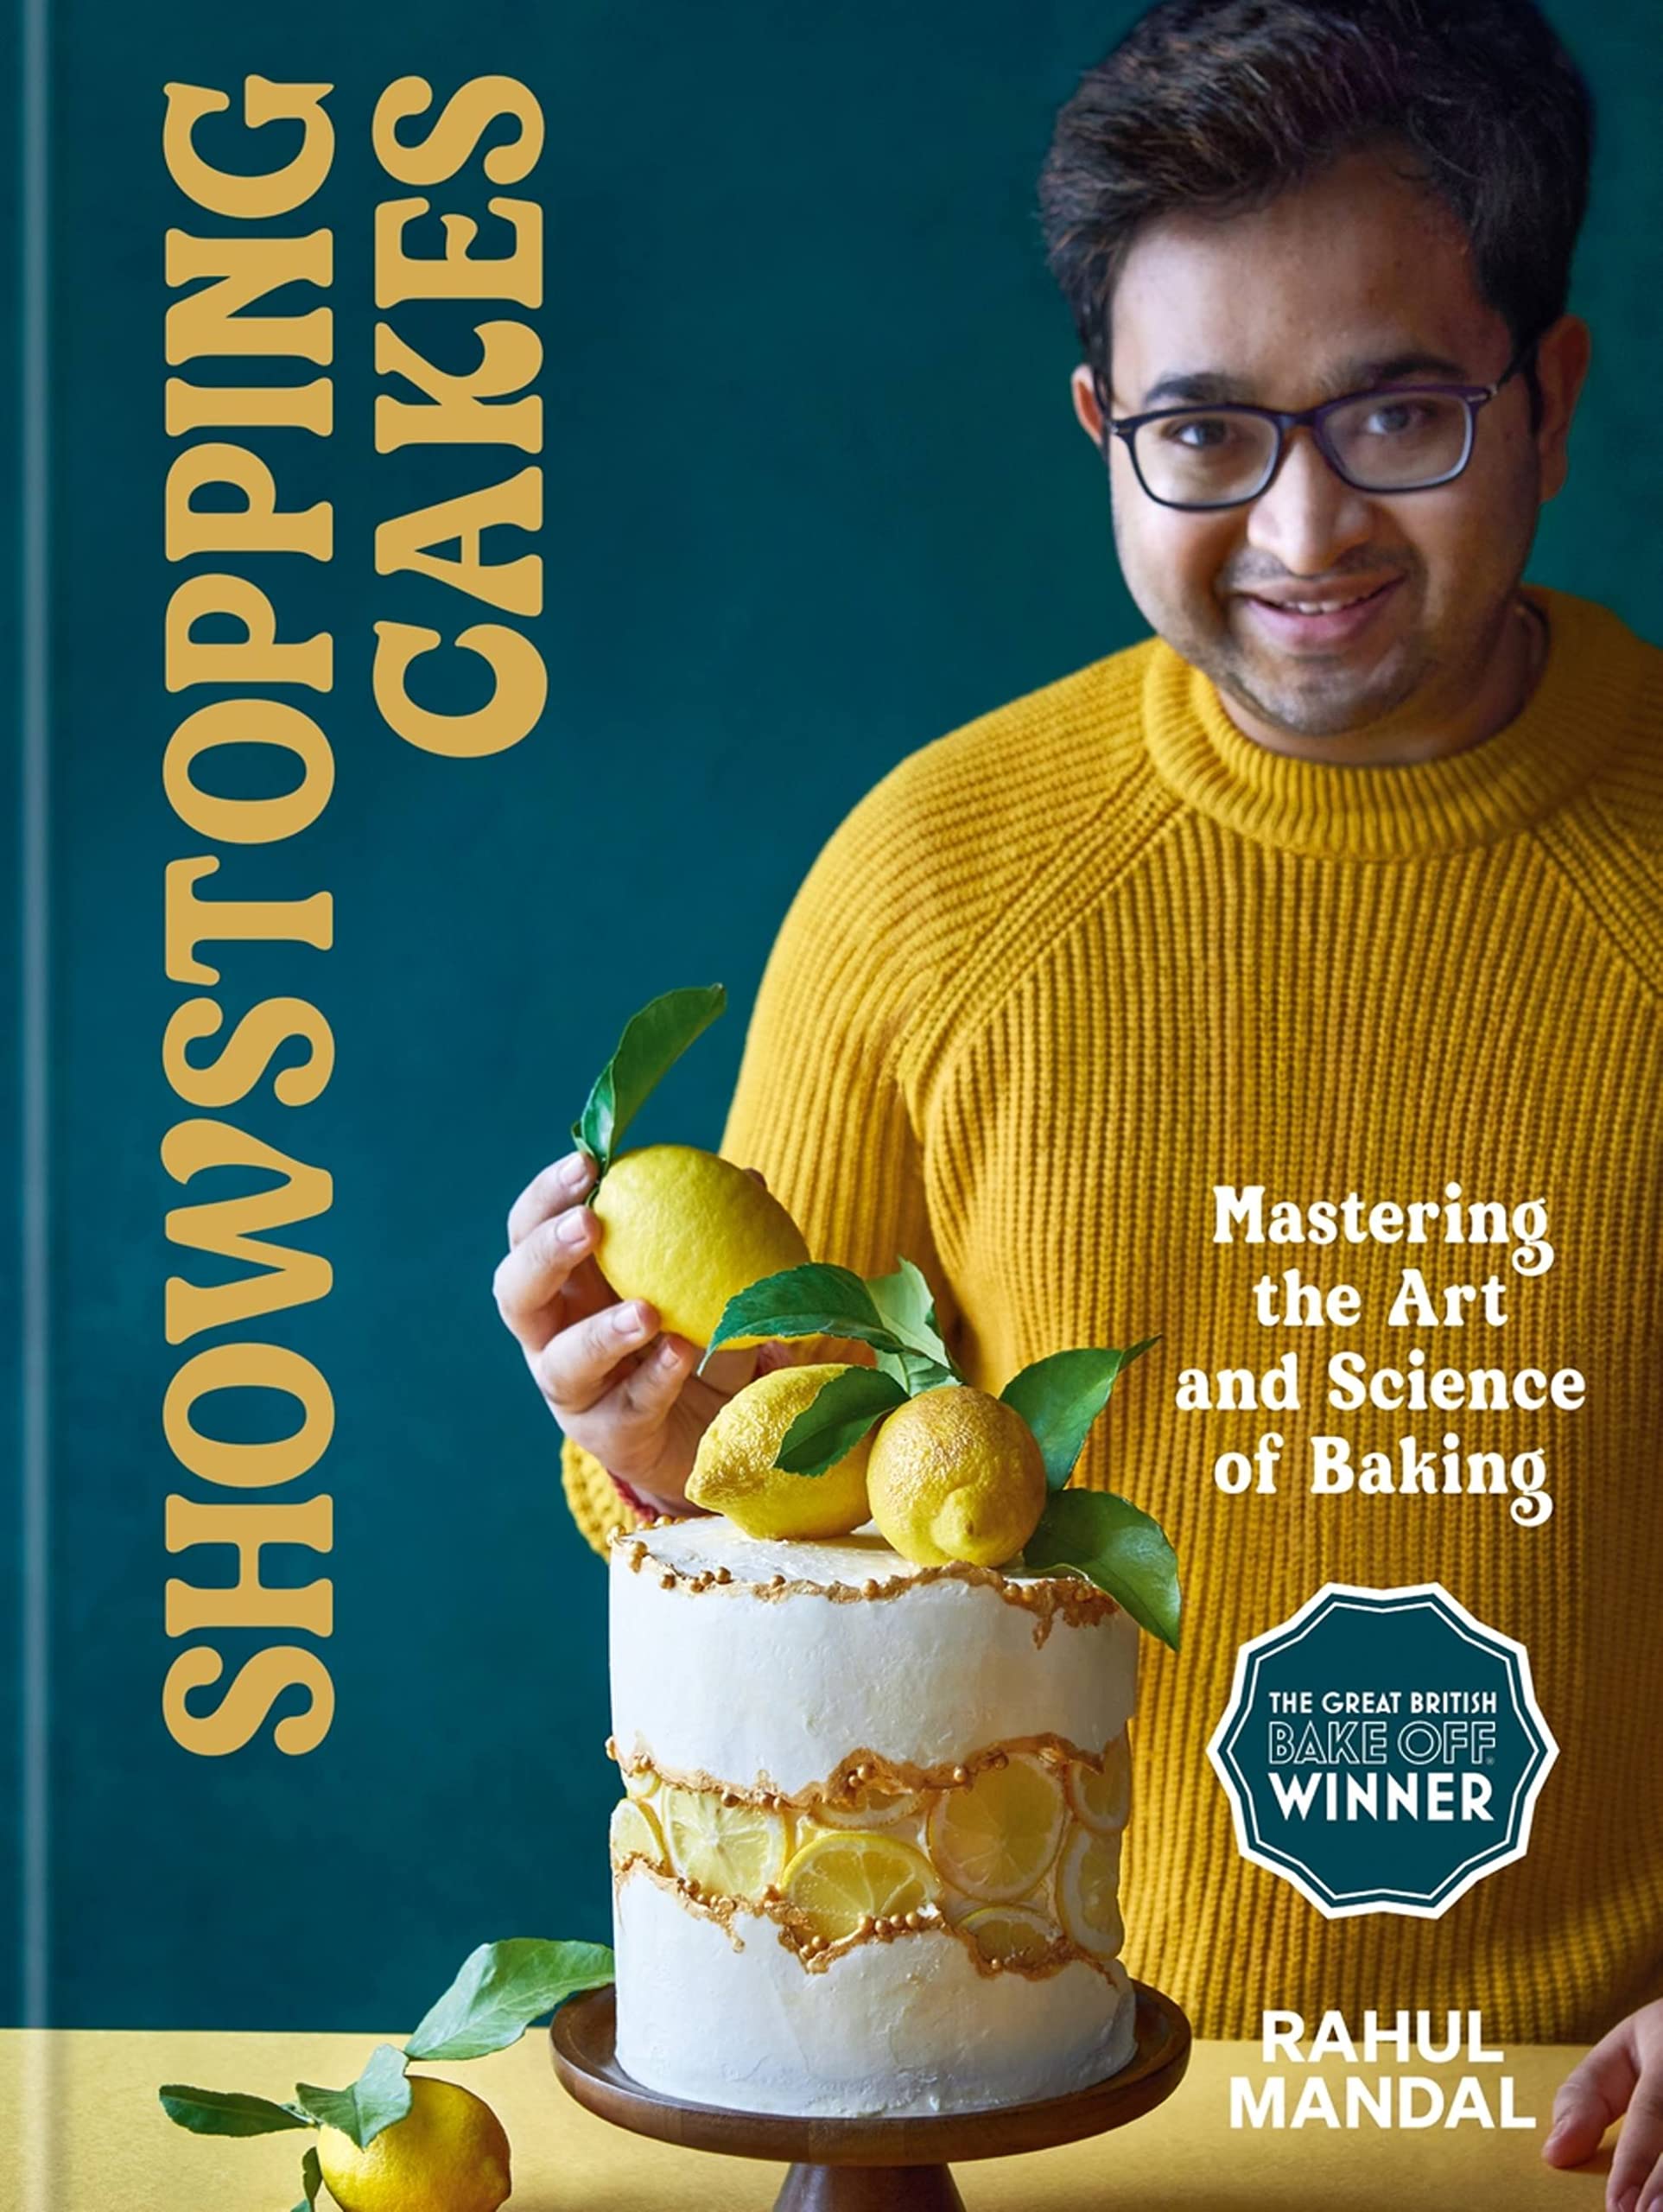 Showstopping Cakes: Mastering the Art and Science of Baking (Rahul Mandal)